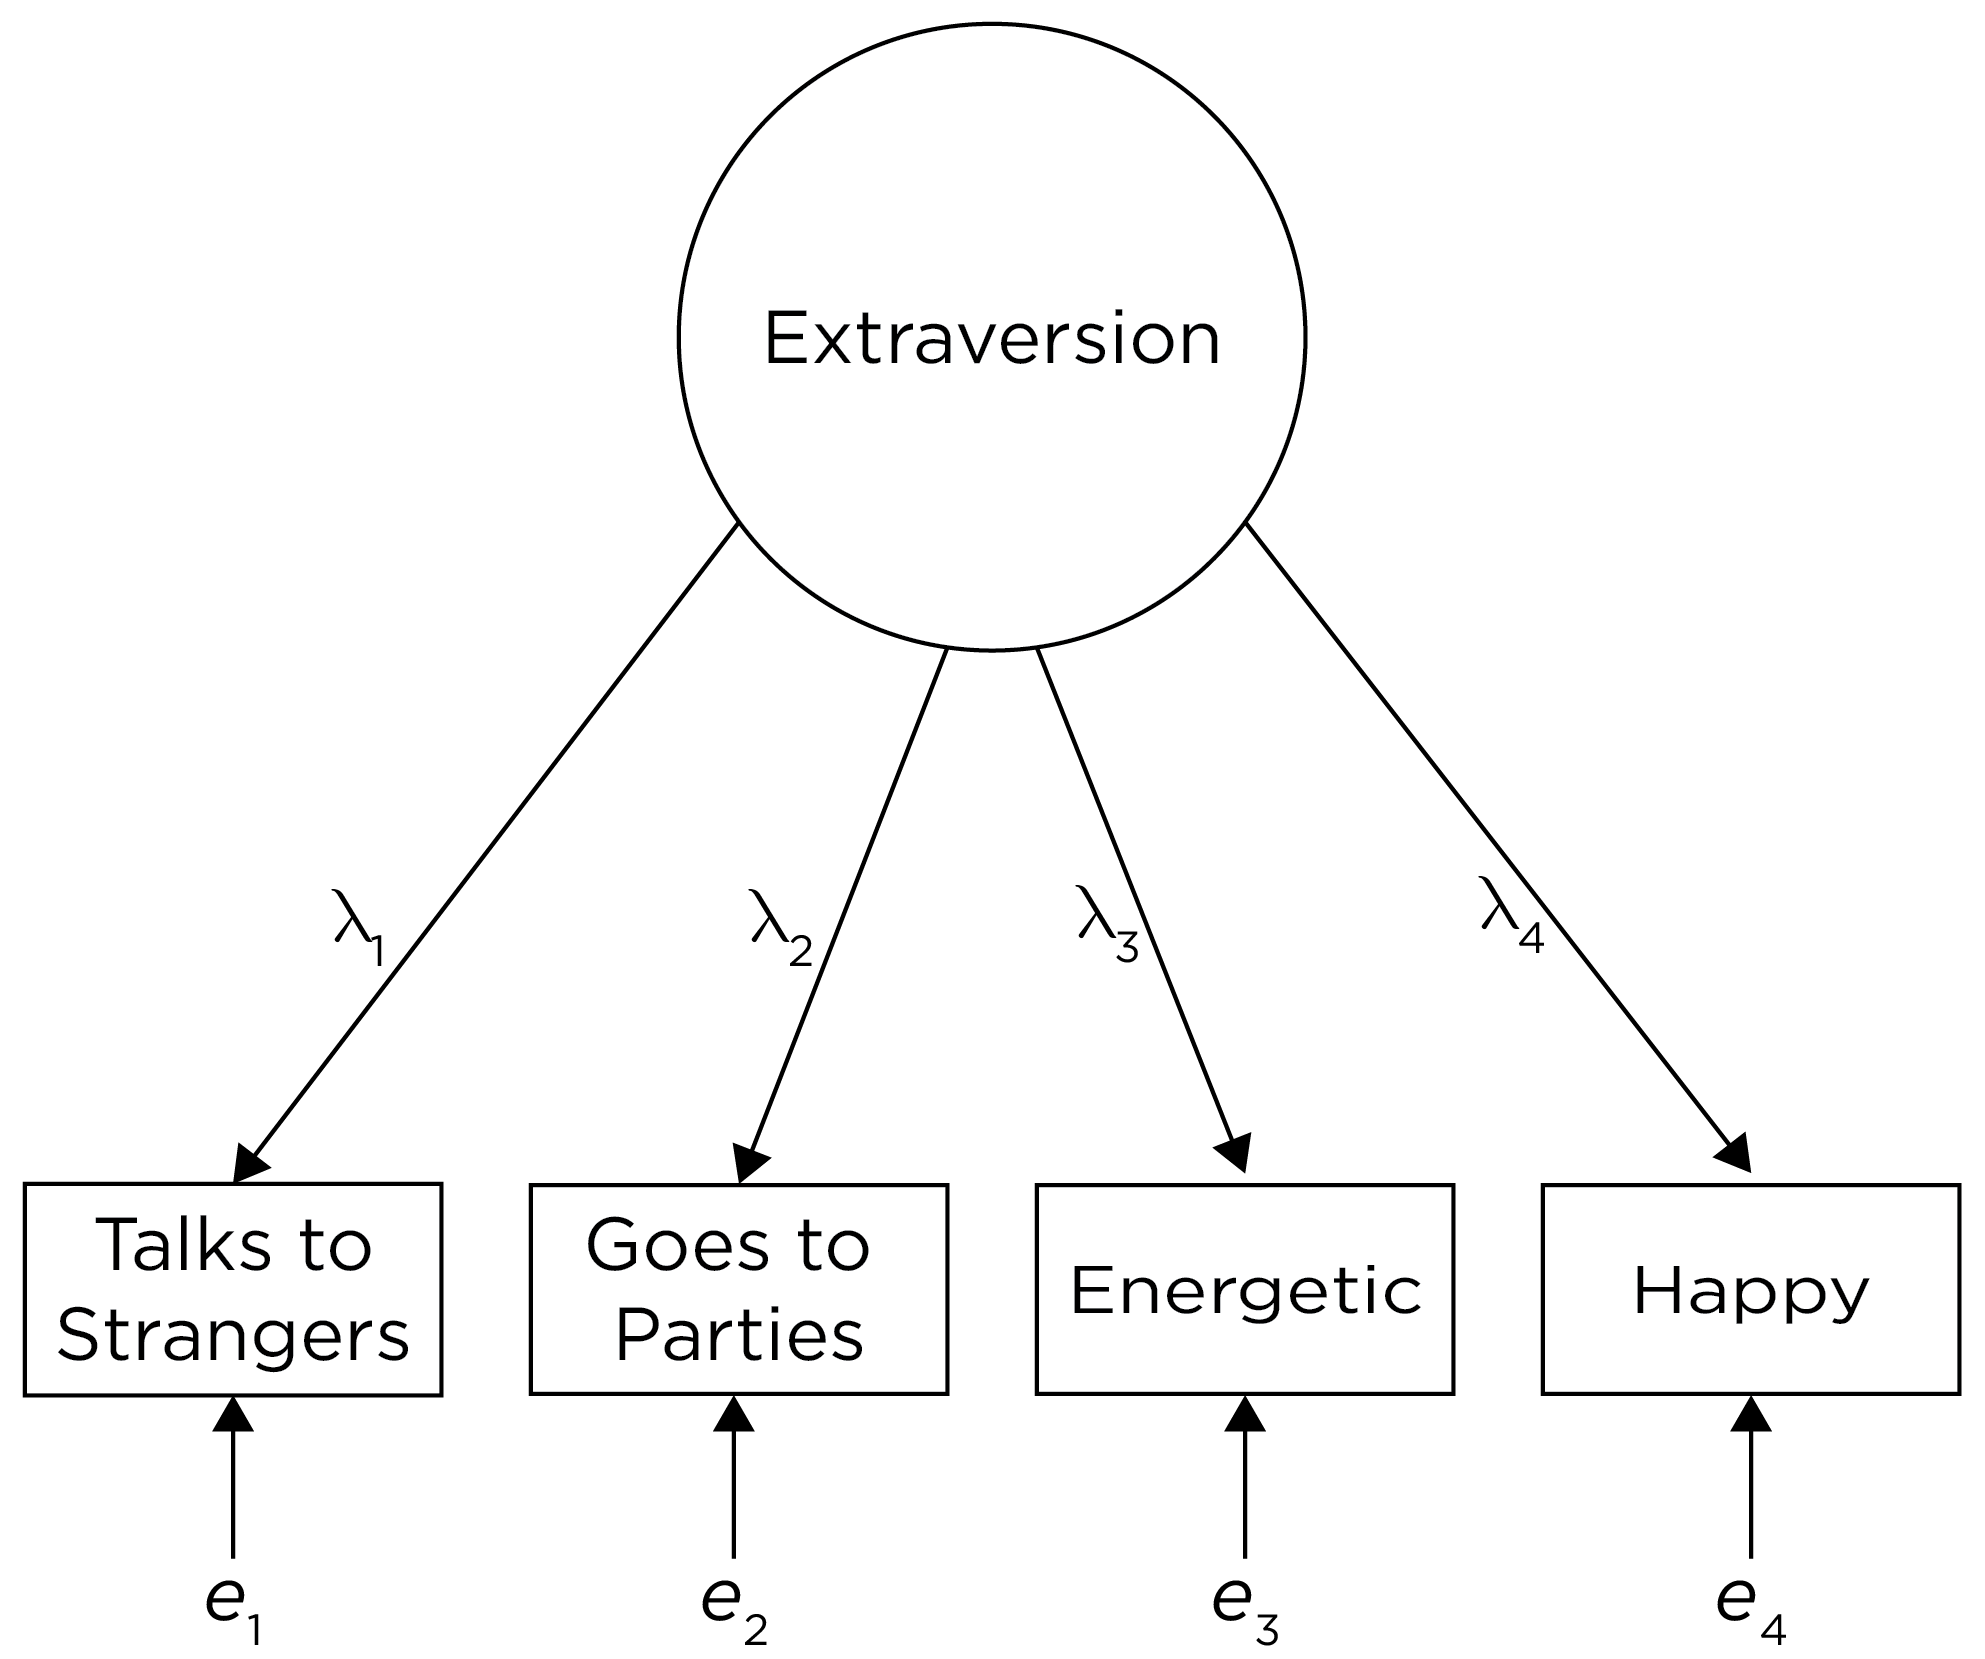 Extraversion as a Reflective Construct.